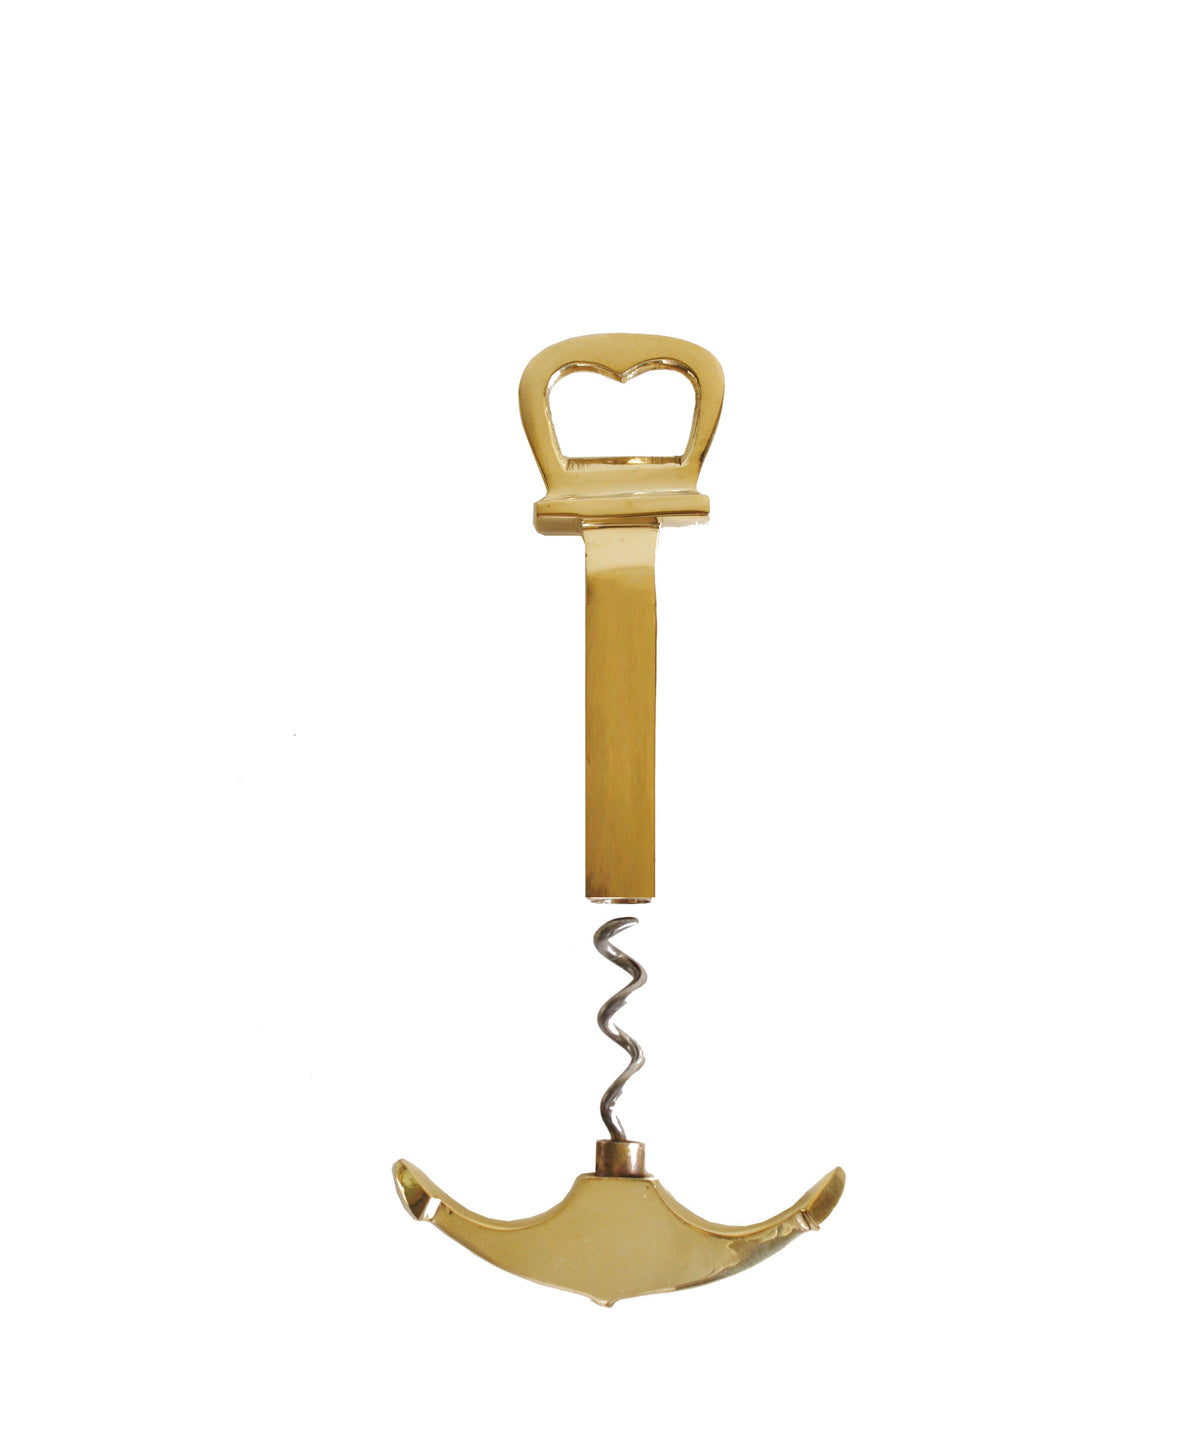 Brass Bottle Openers & Corkscrews for Sale at Auction